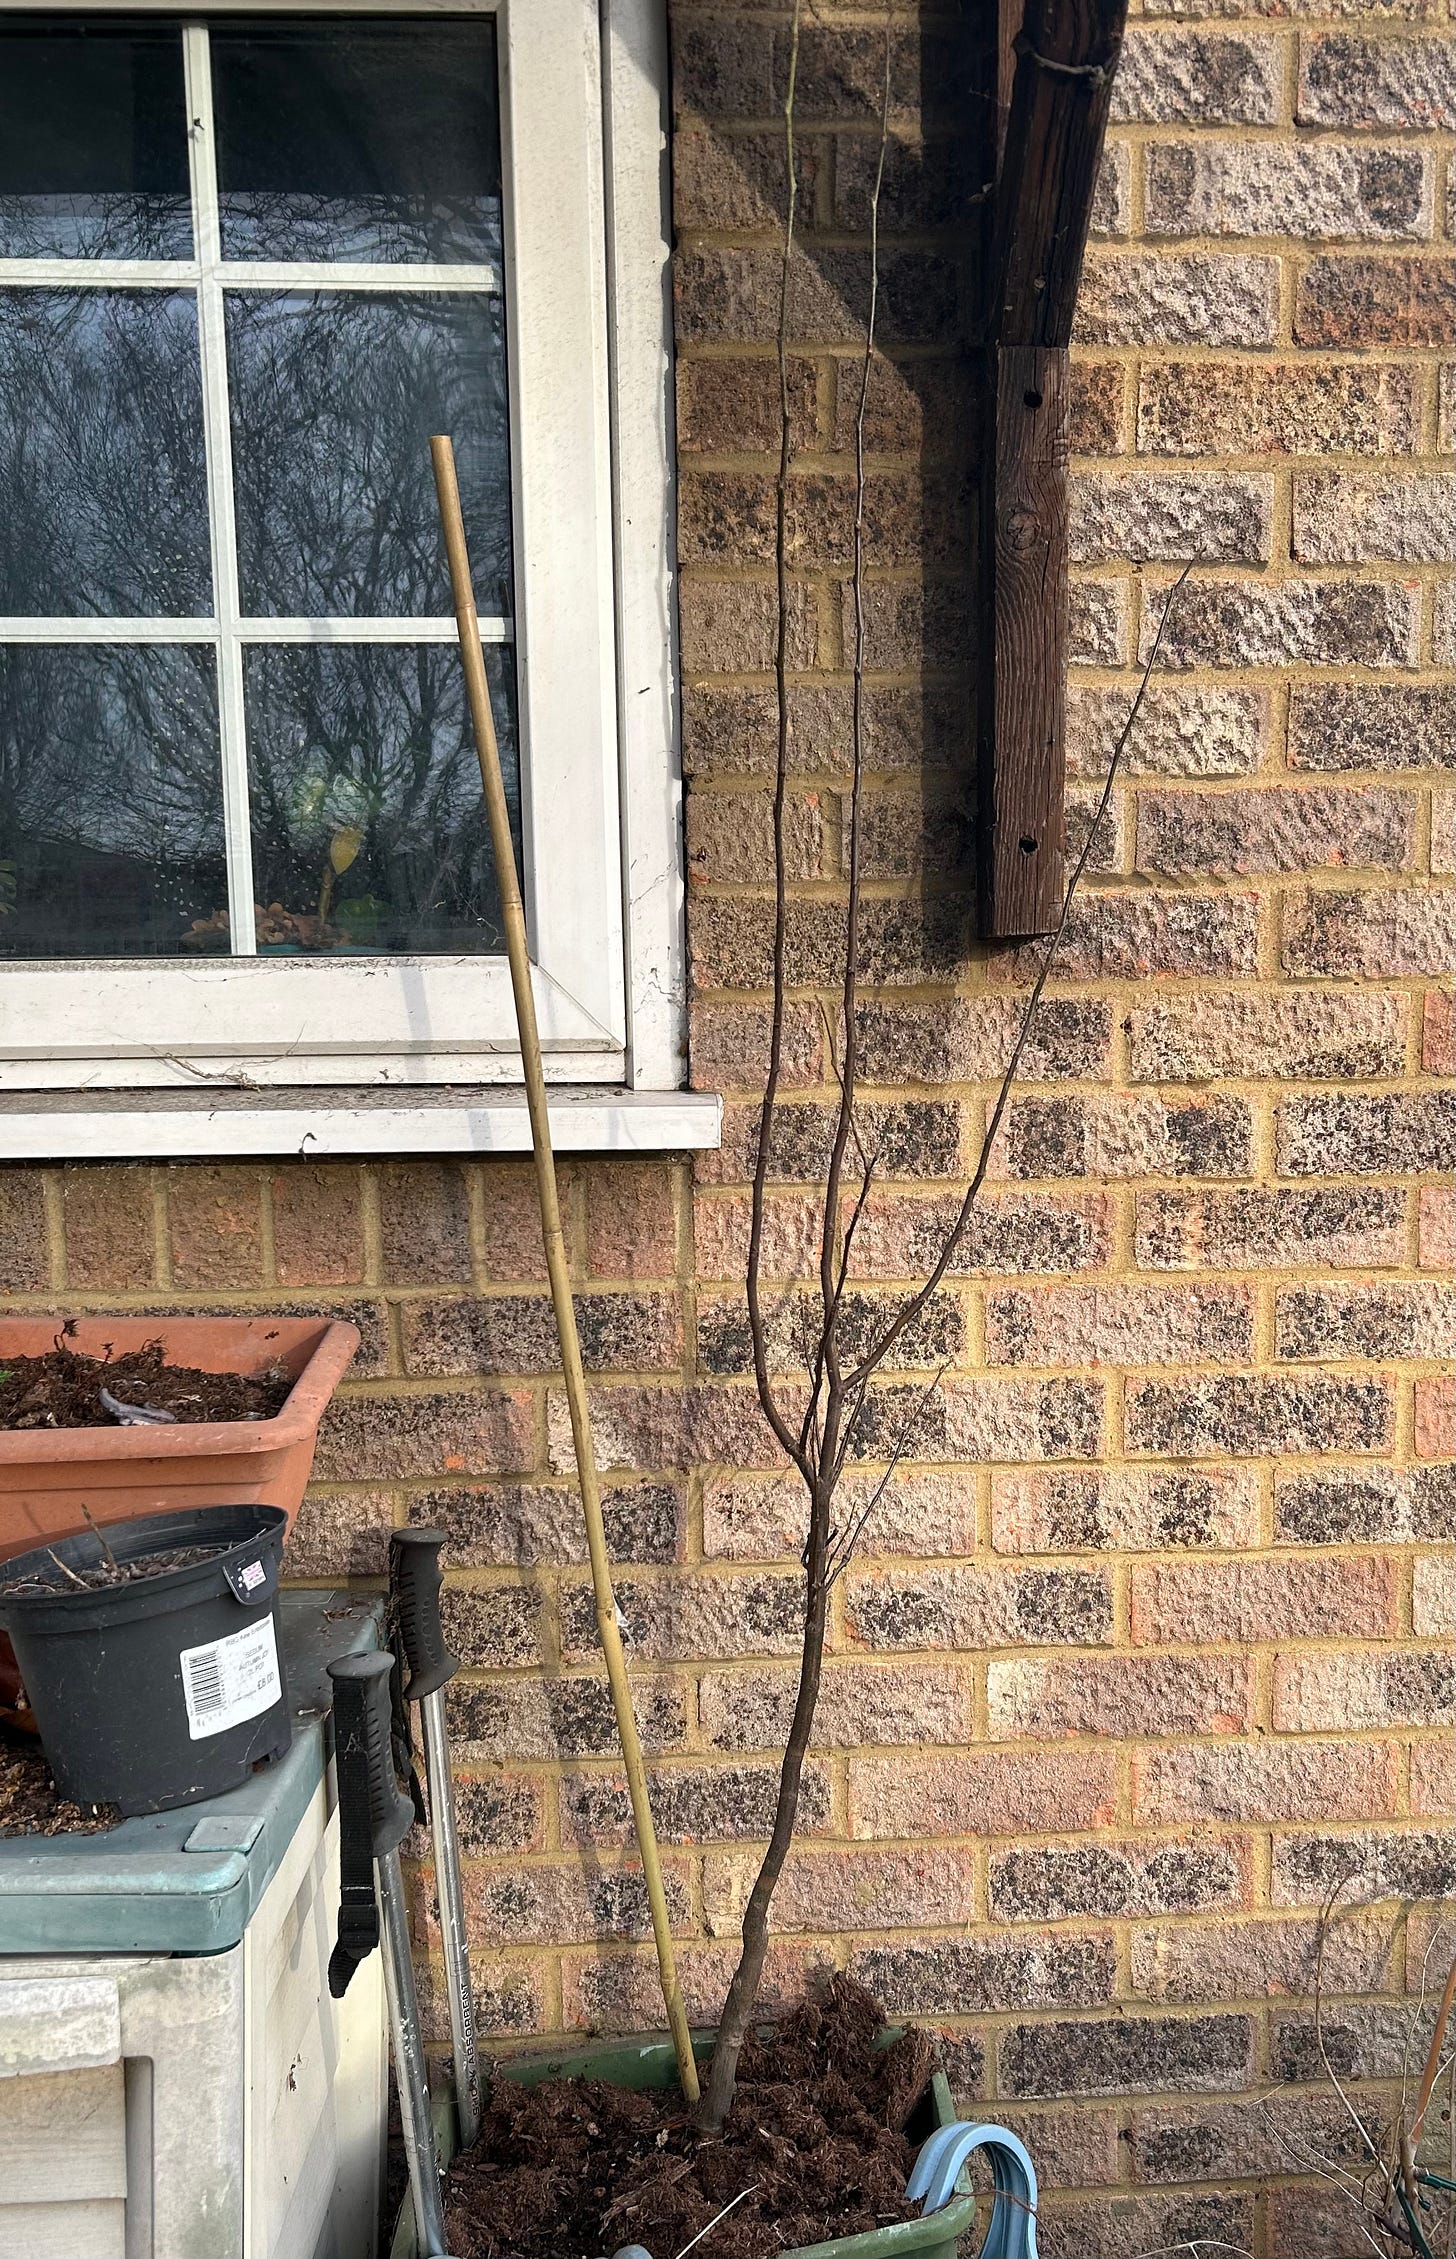 A bare tree with no leaves, planted in a pot and leaning against a brick wall.